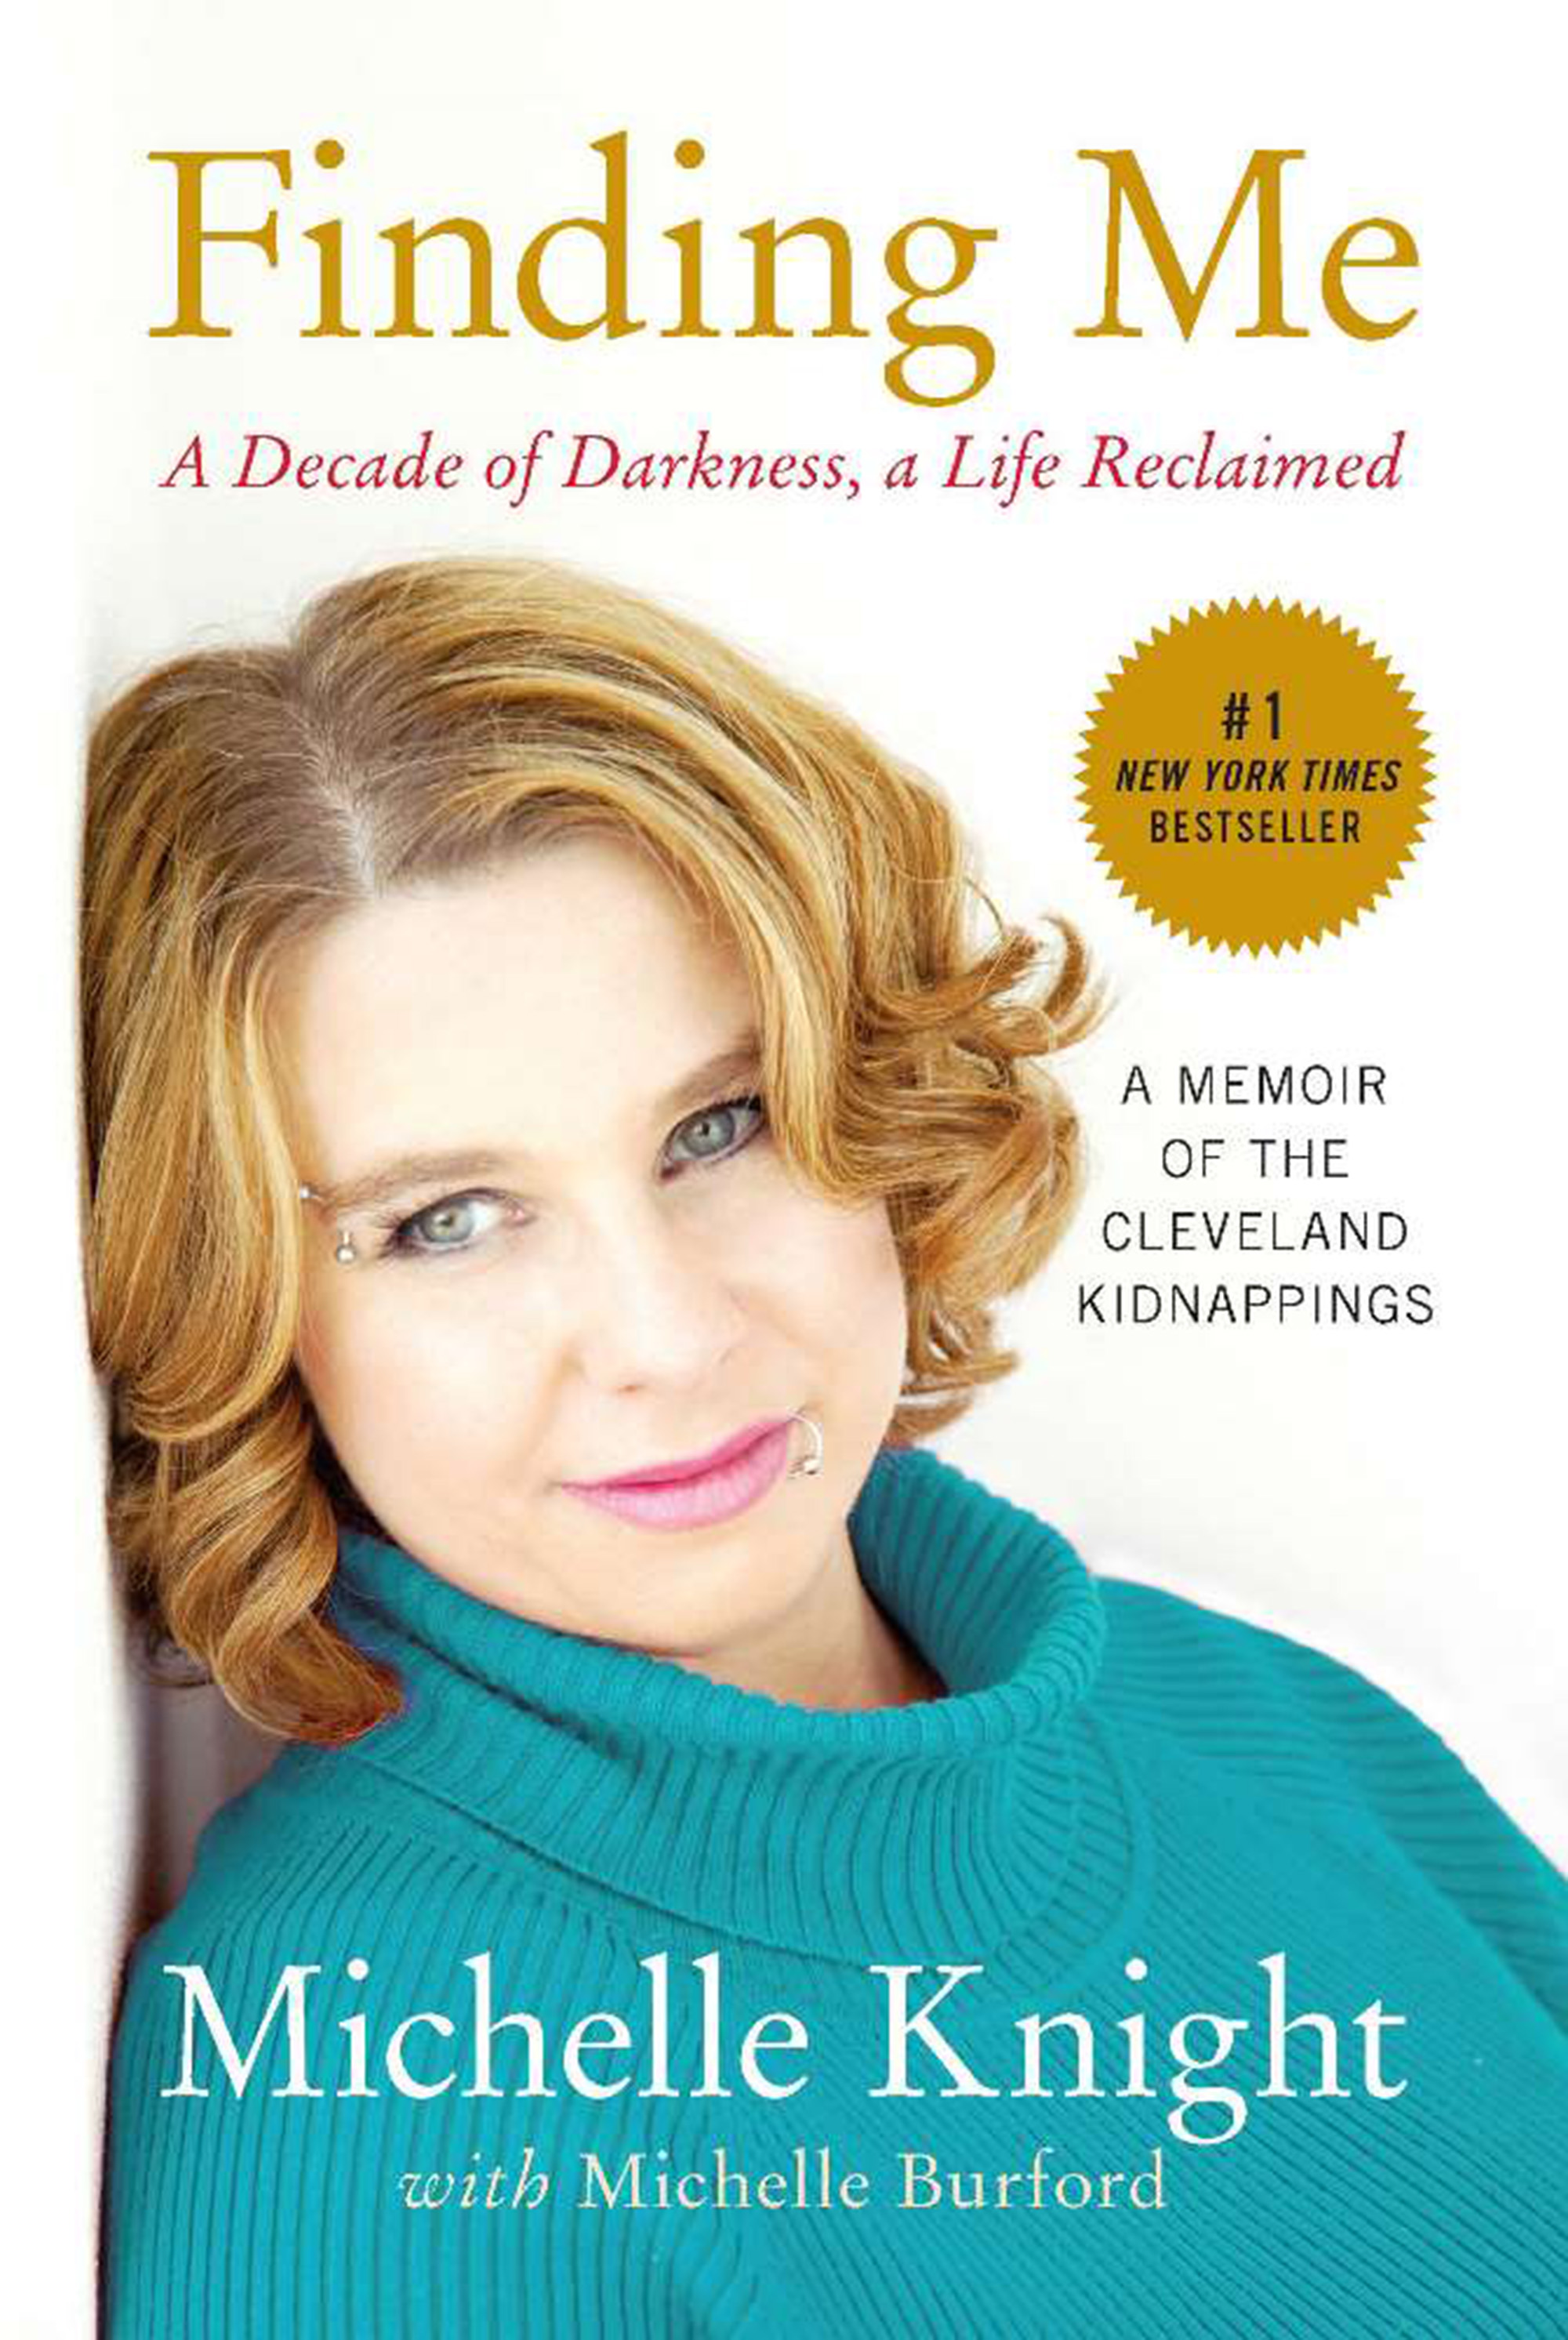 Umschlagbild für Finding Me [electronic resource] : A Decade of Darkness, a Life Reclaimed: A Memoir of the Cleveland Kidnappings